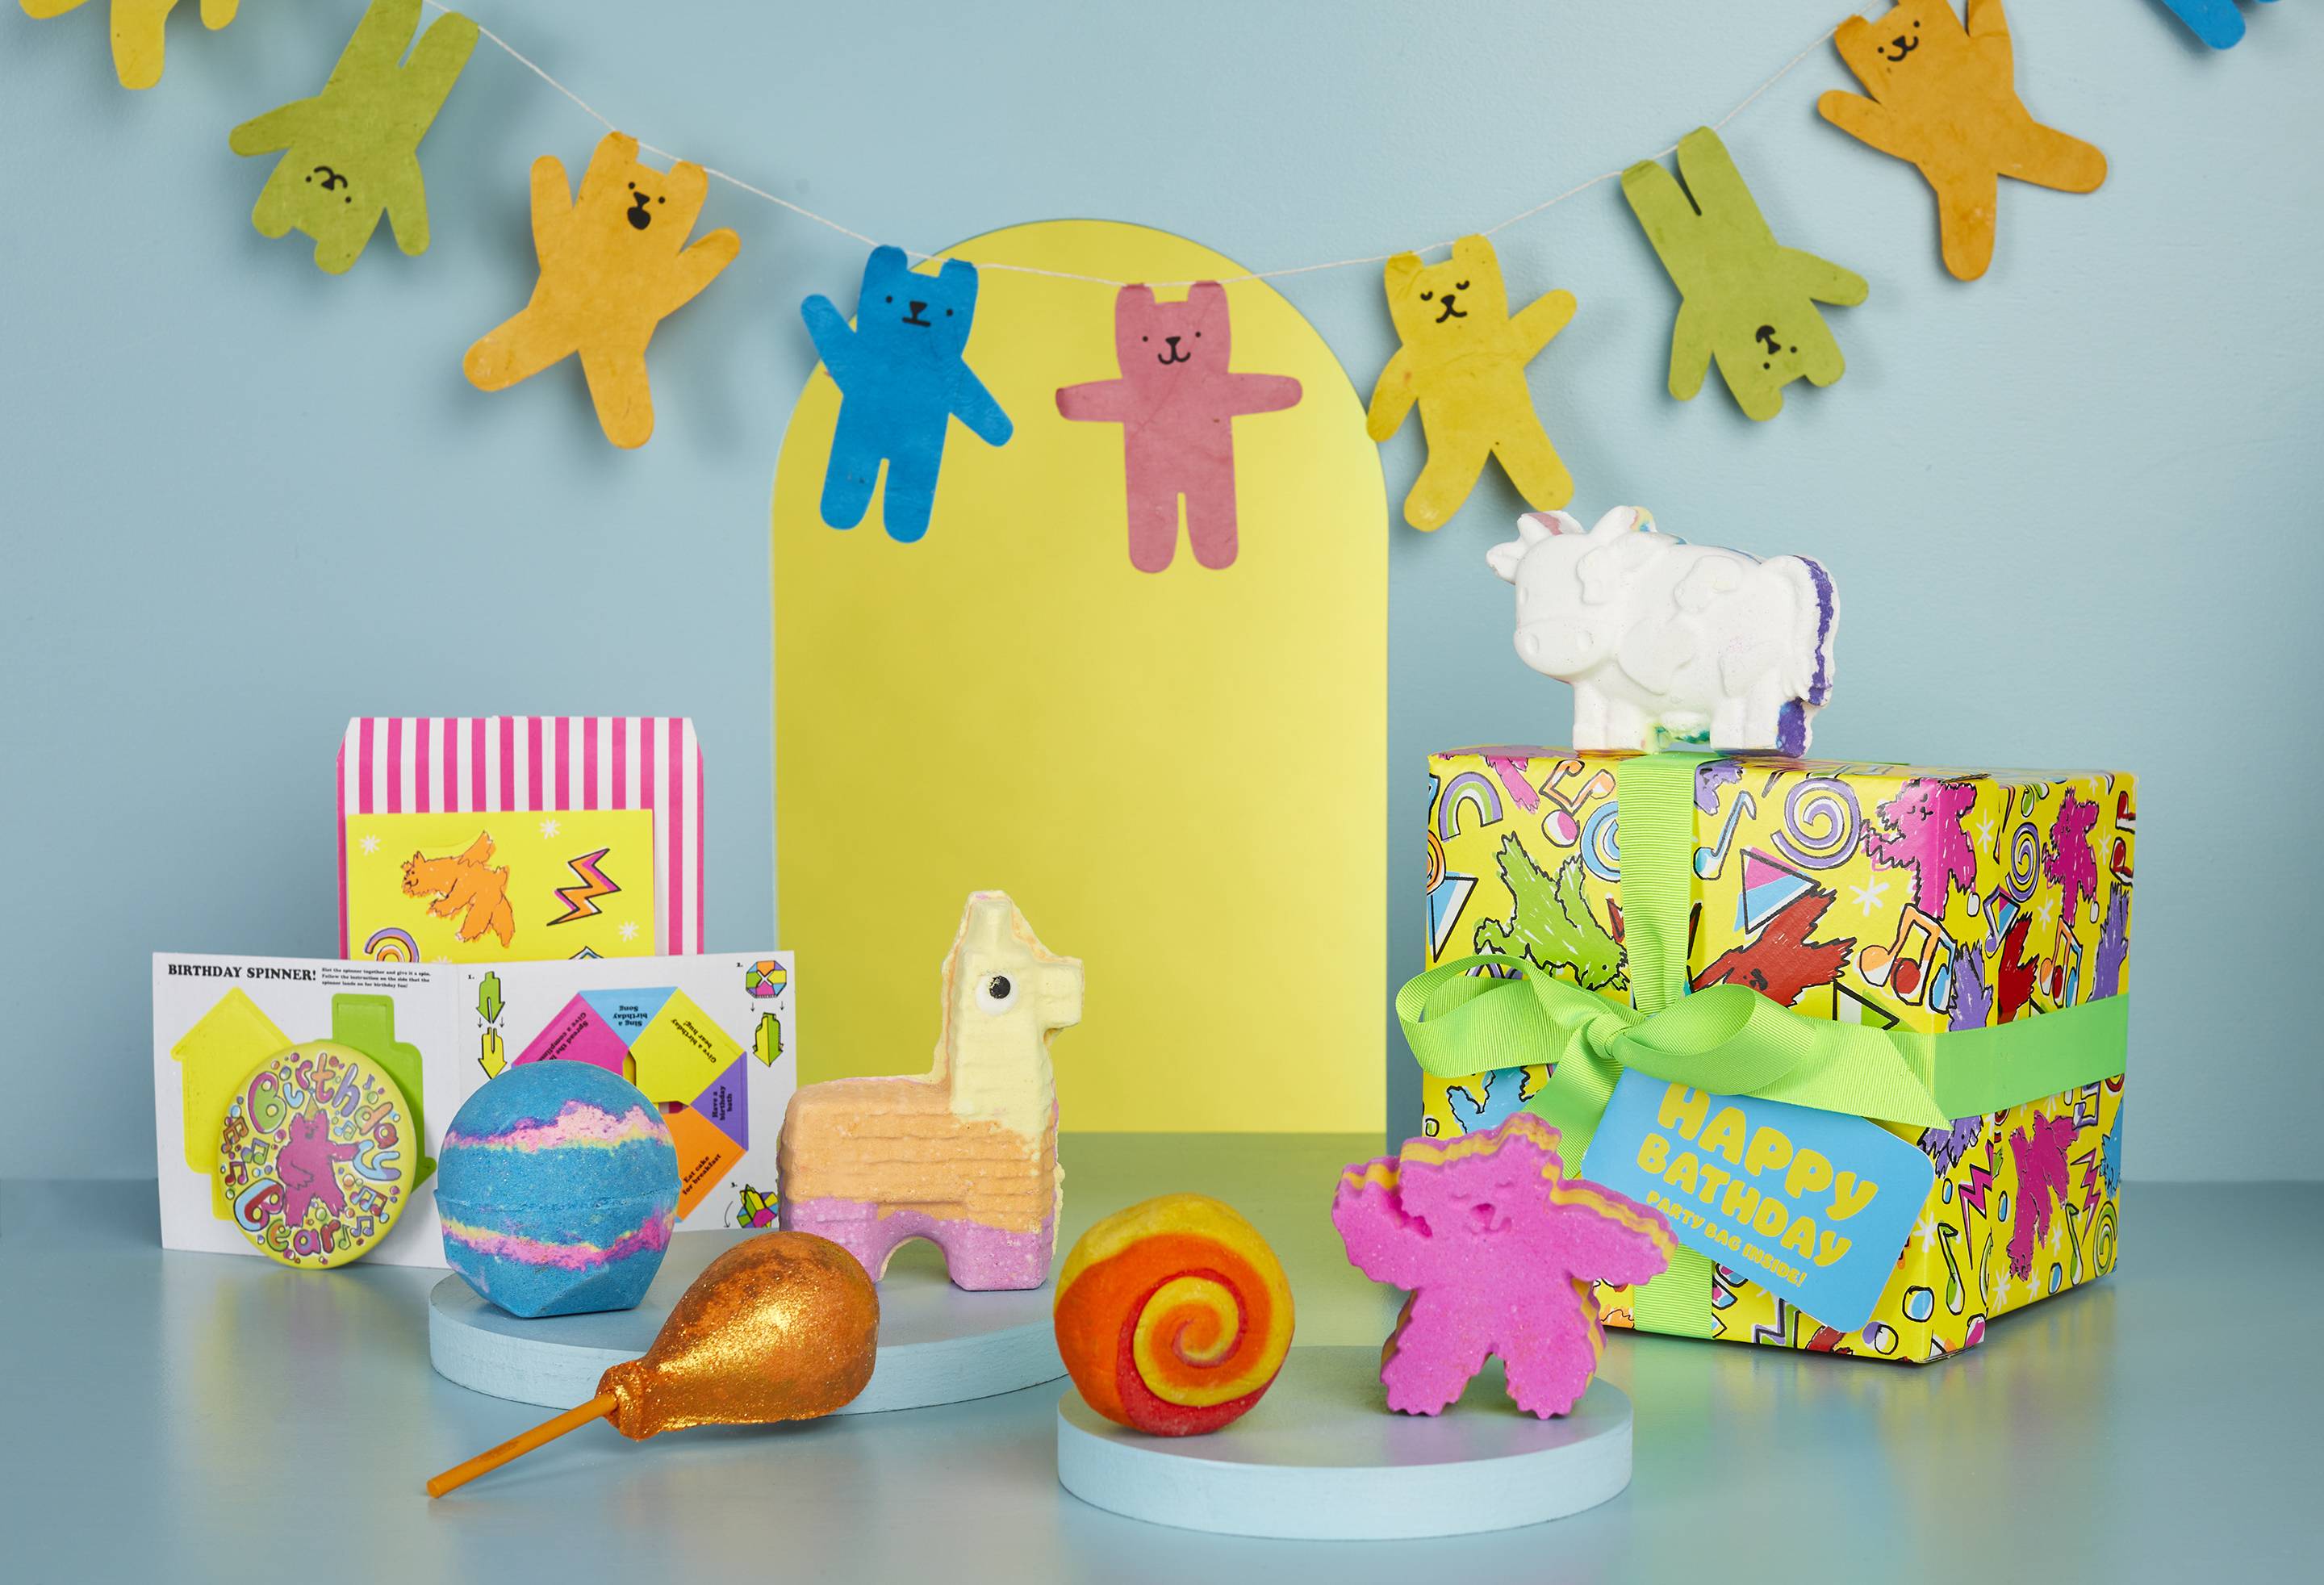 The Happy Bathday gift box, along with the six bath products and extra goodies included, is sat on a pale blue background. There is a yellow arch shape behind it and a banner with different coloured dancing bears attached. 